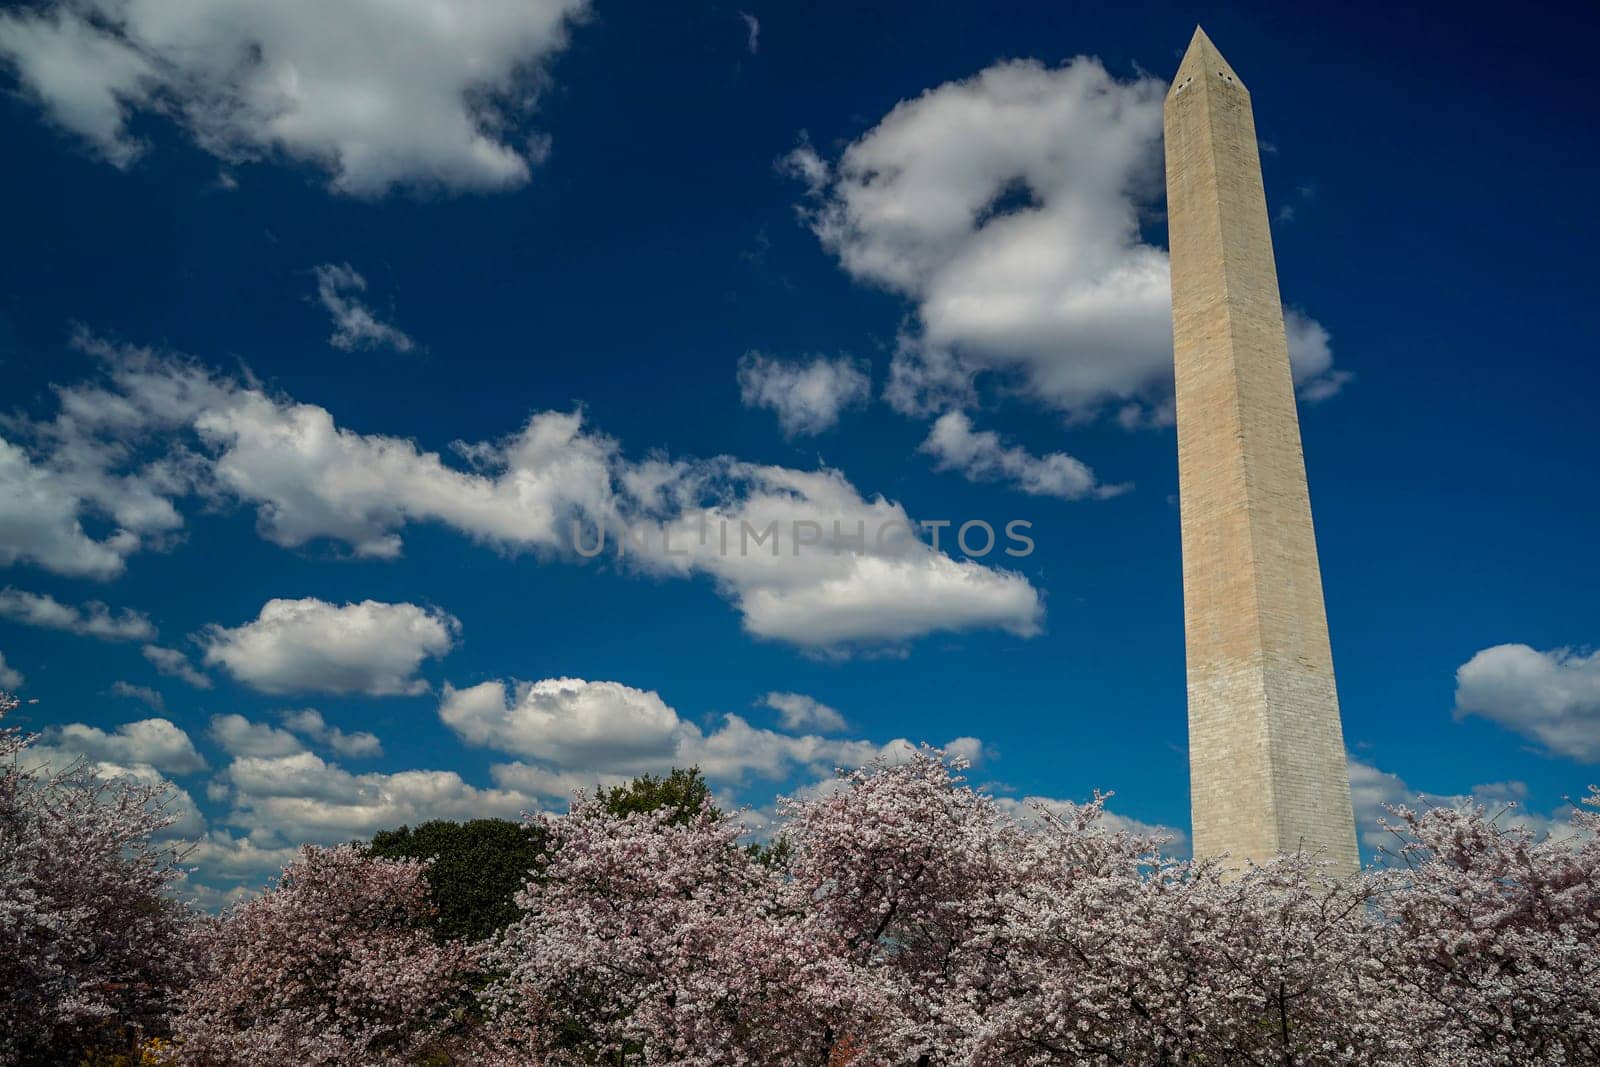 Cherry blossom in washington dc monument by AndreaIzzotti